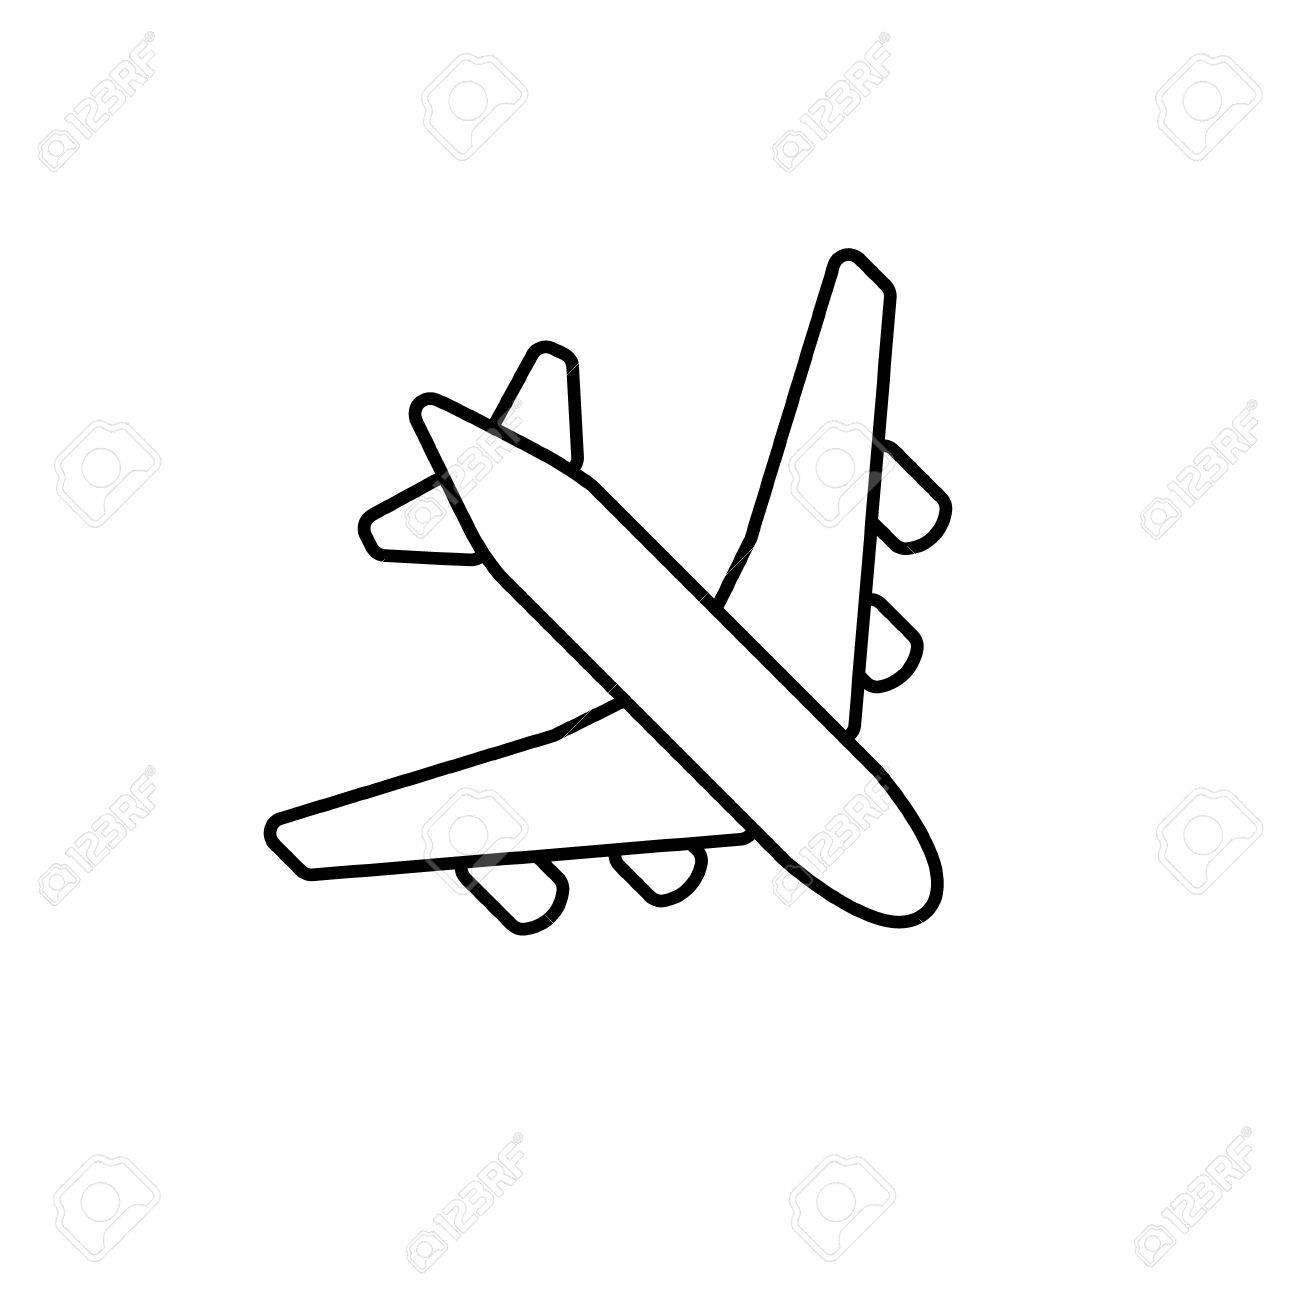 Simple drawing airplane - gasepicture